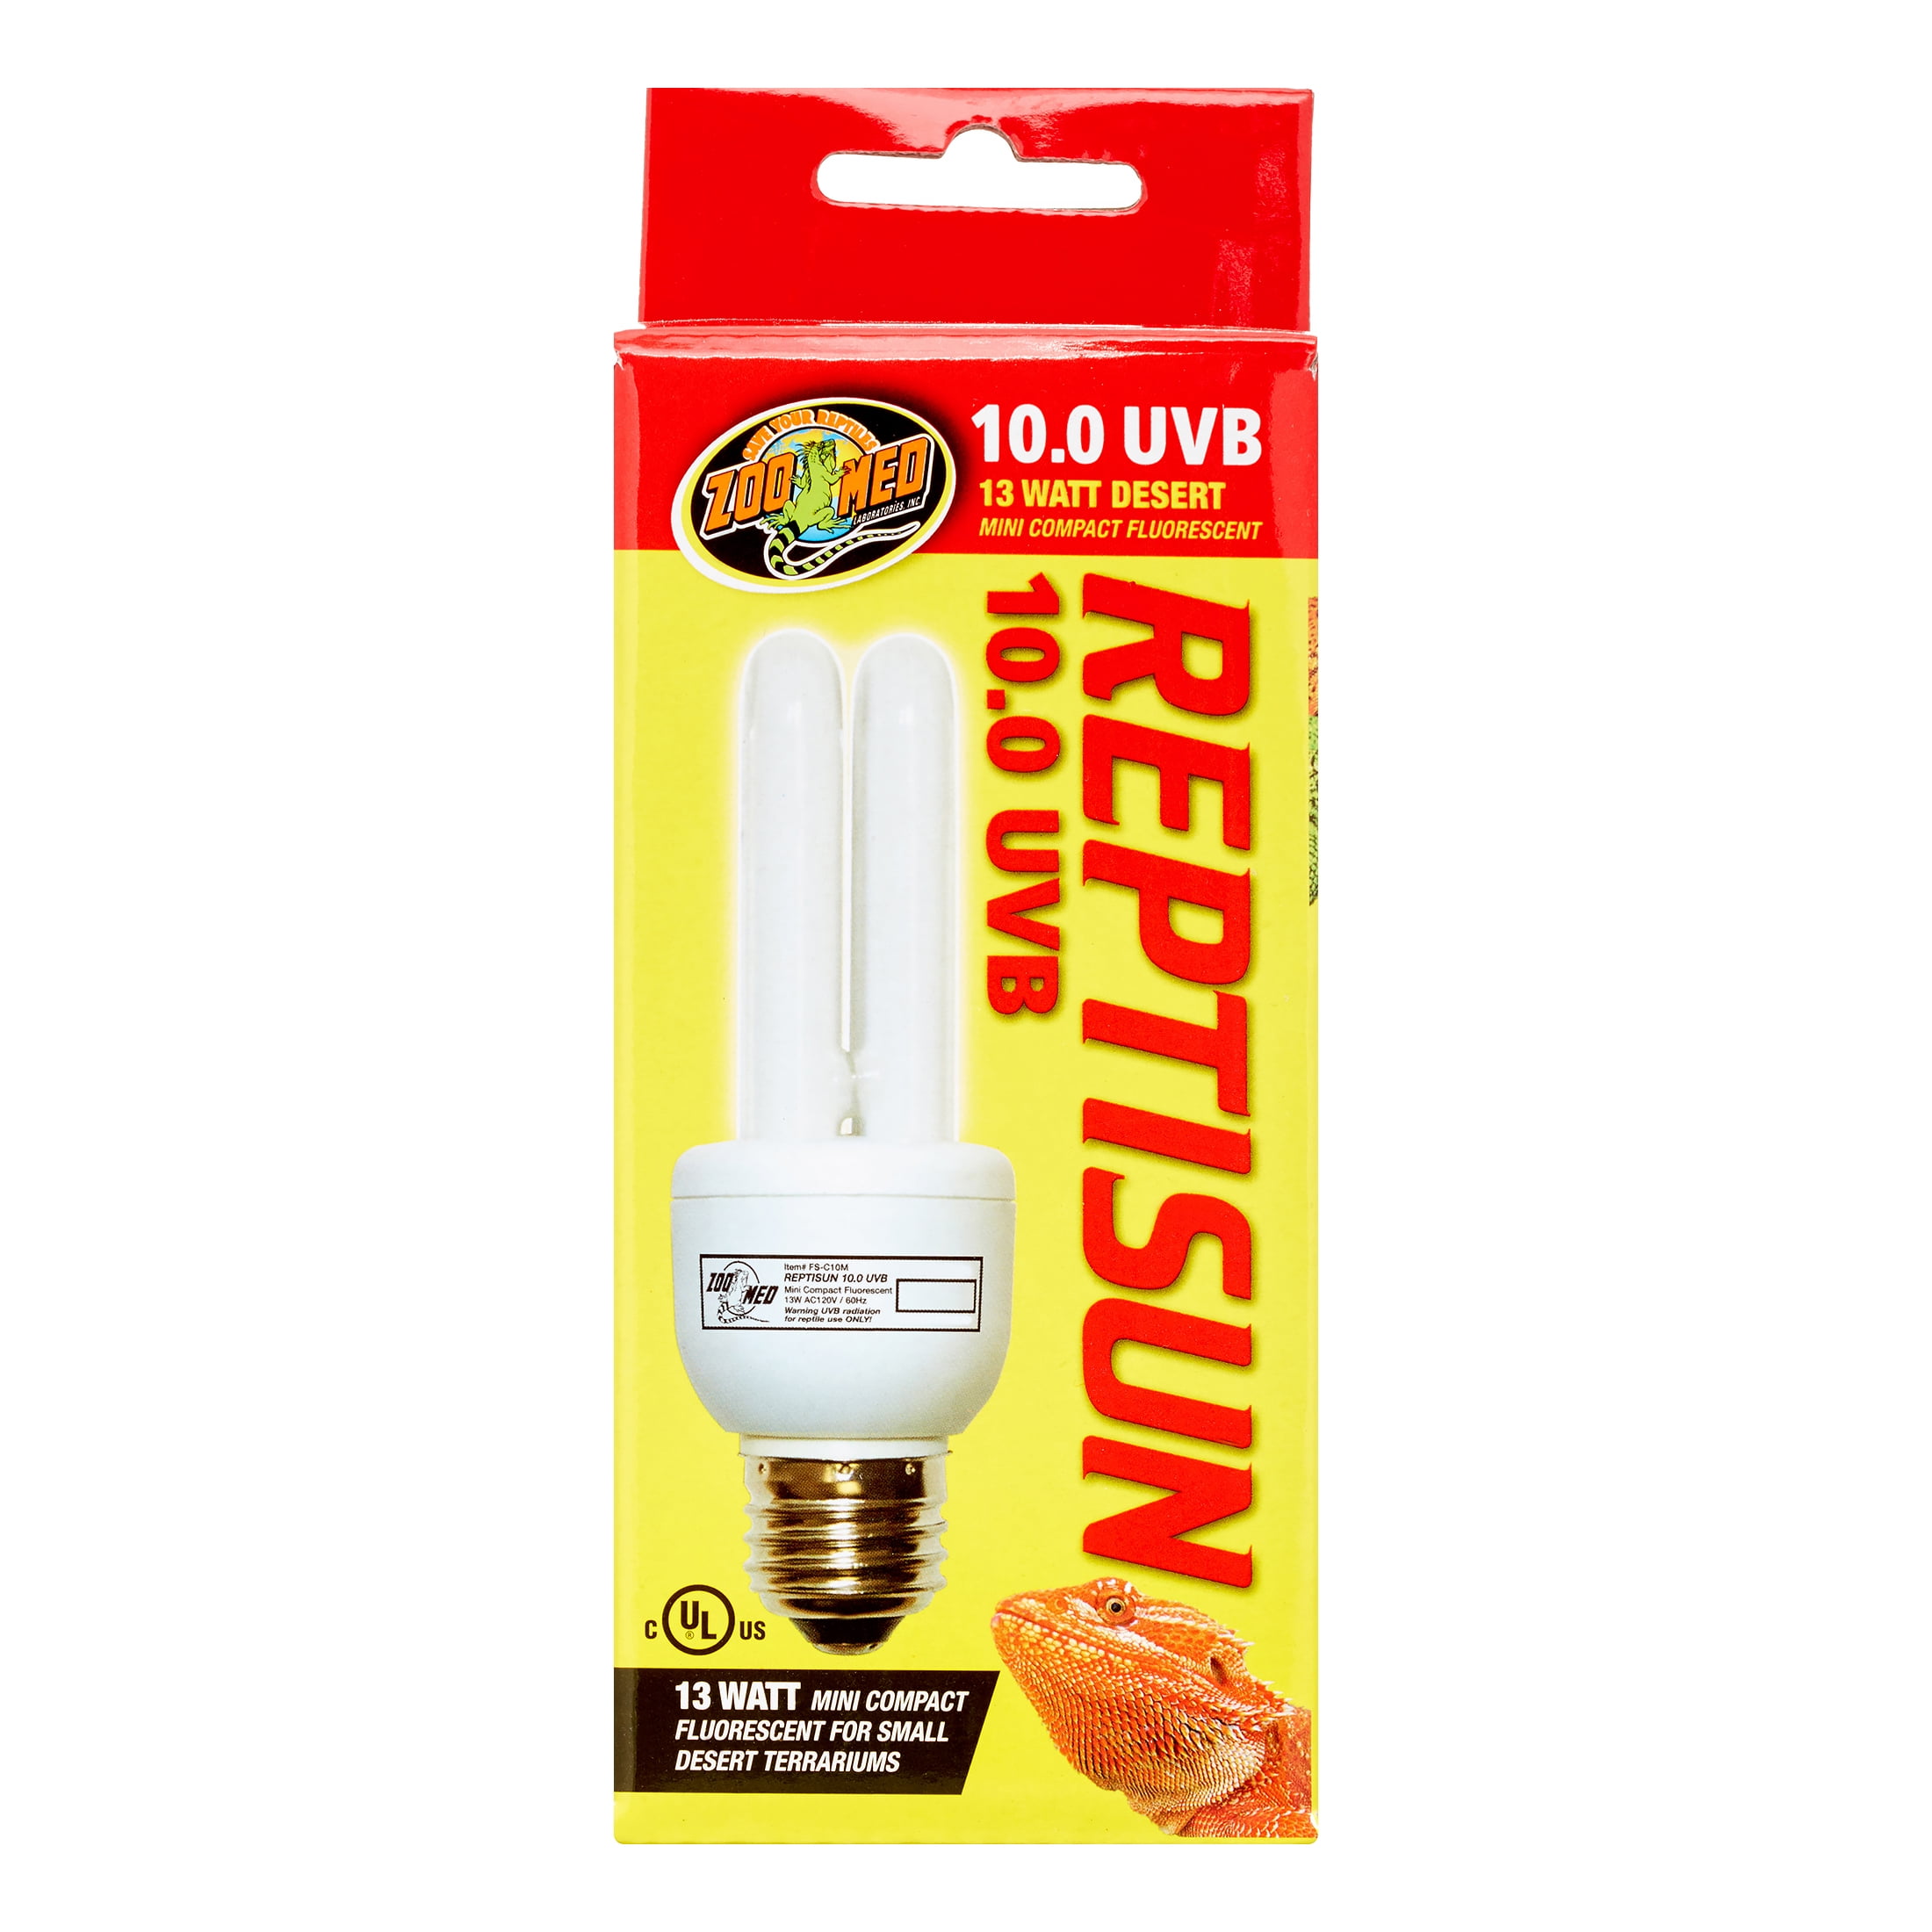 Zoo Med ReptiSun T5 HO 5.0 UVB Replacement Bulb 24 Watts 22 Bulb Pack of 2